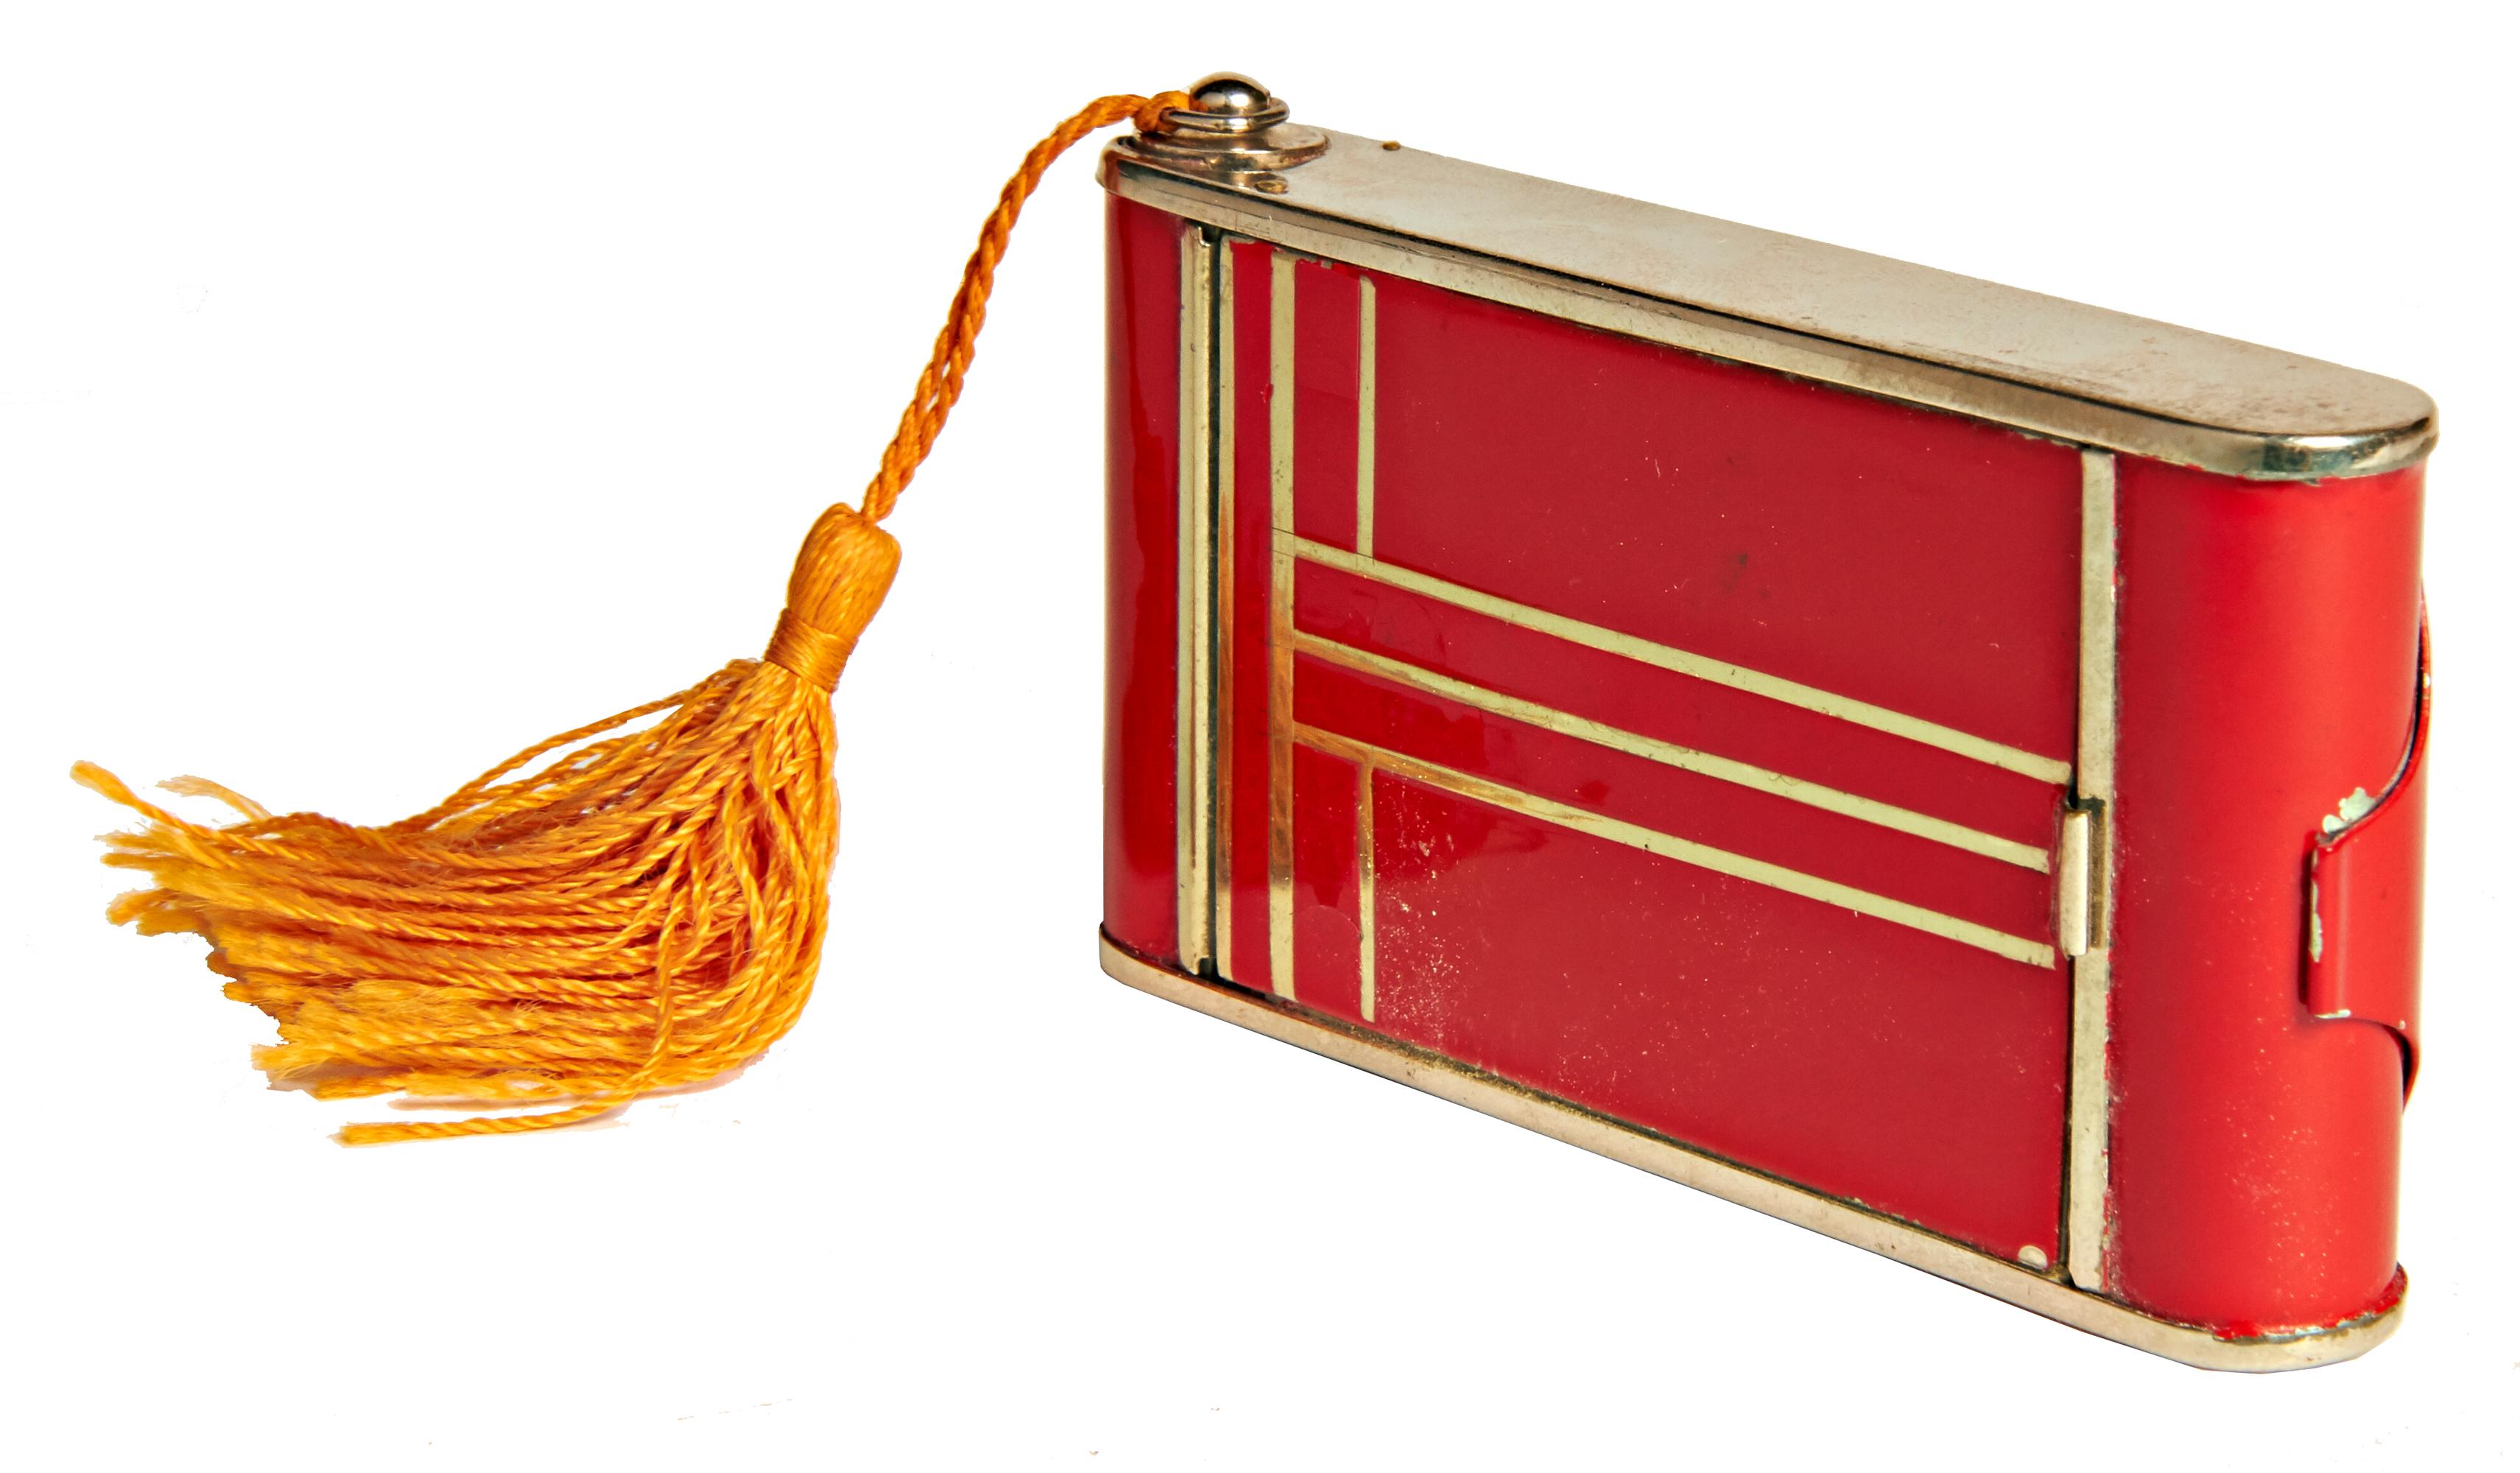 This beautifully designed German Art Deco camera compact/minaudiere features red enamel accented with a geometric design of chrome lines on the front with a solid red back. On one side it has a large lift-top compact with mirror and complete with